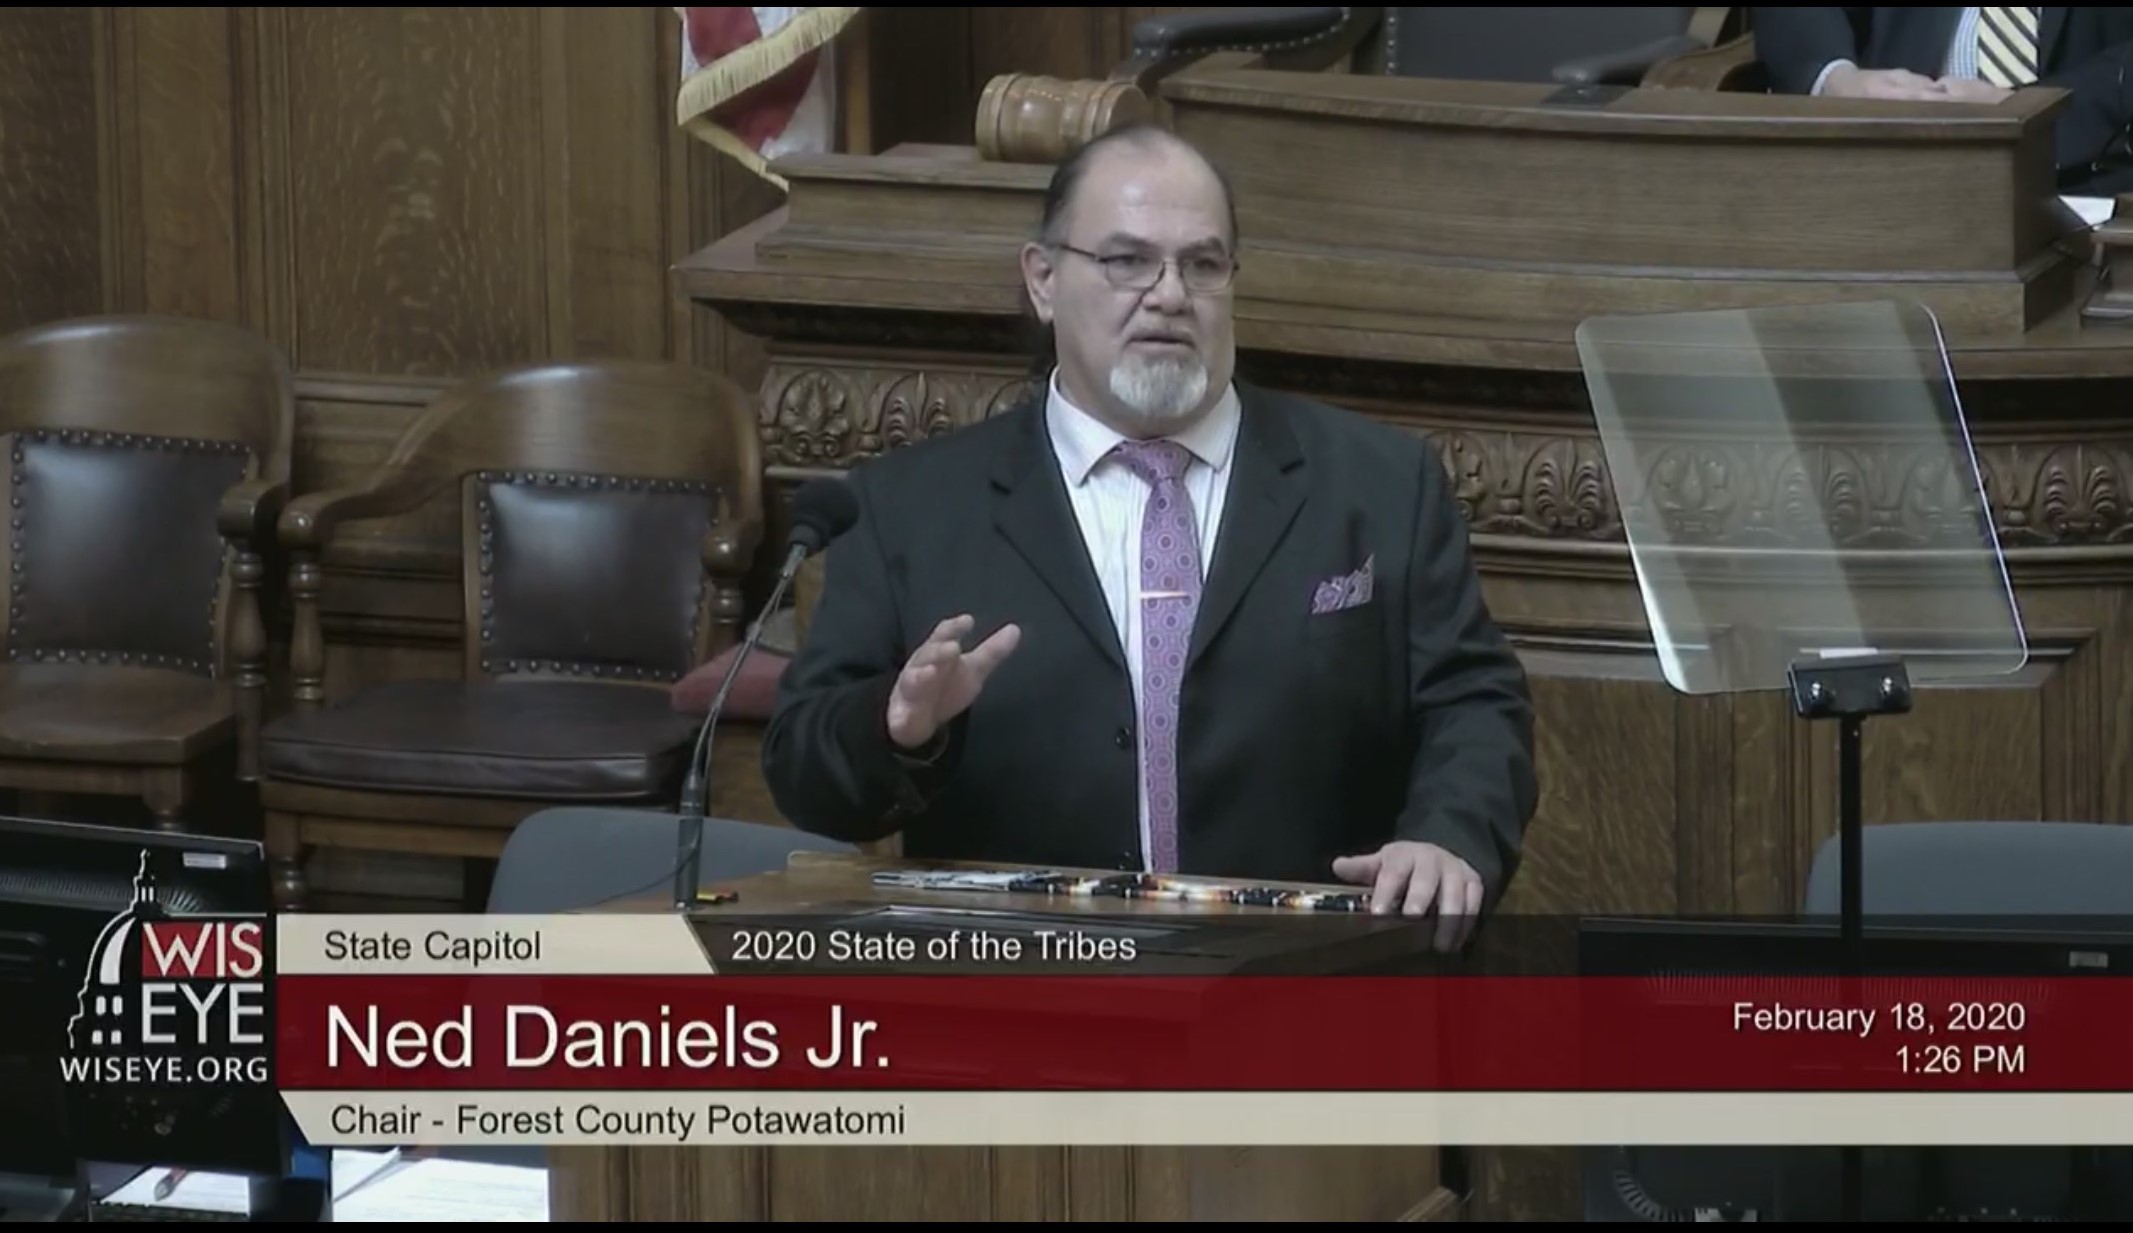 Ned Daniels Jr. gives 2020 State of the Tribes address